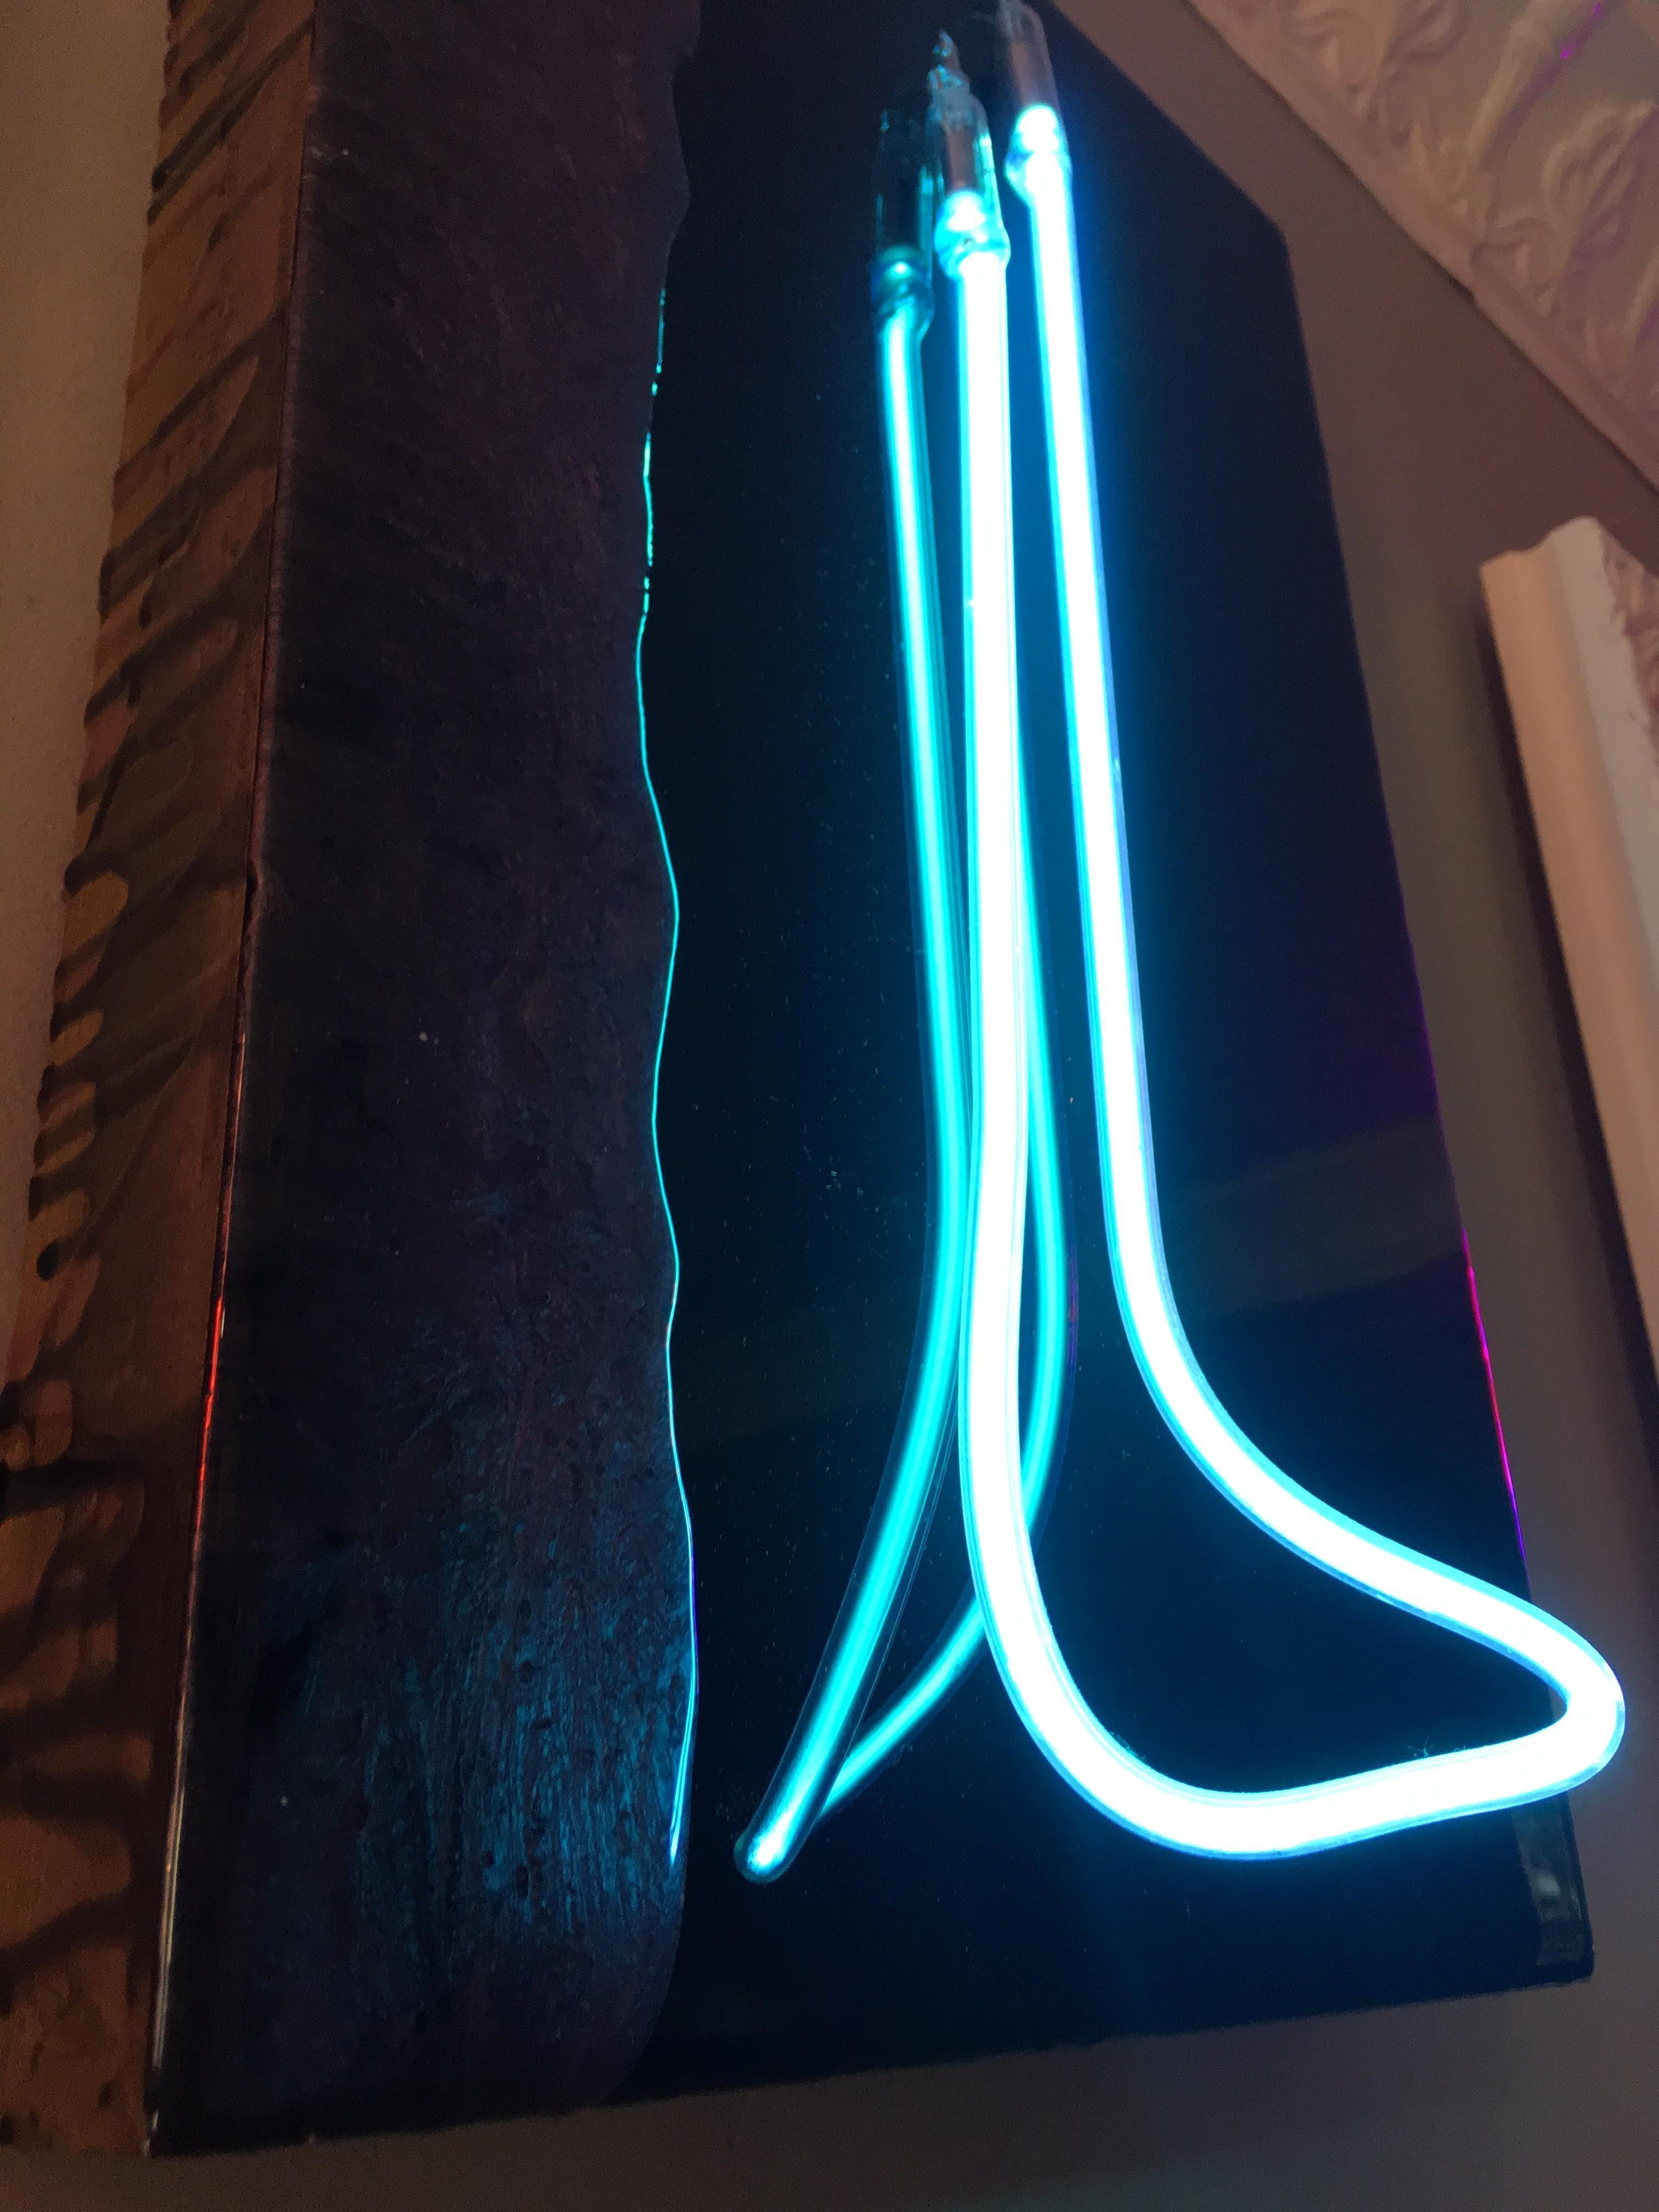 American Wall Mounted Neon on an Epoxy Resin Coated Canvas For Sale